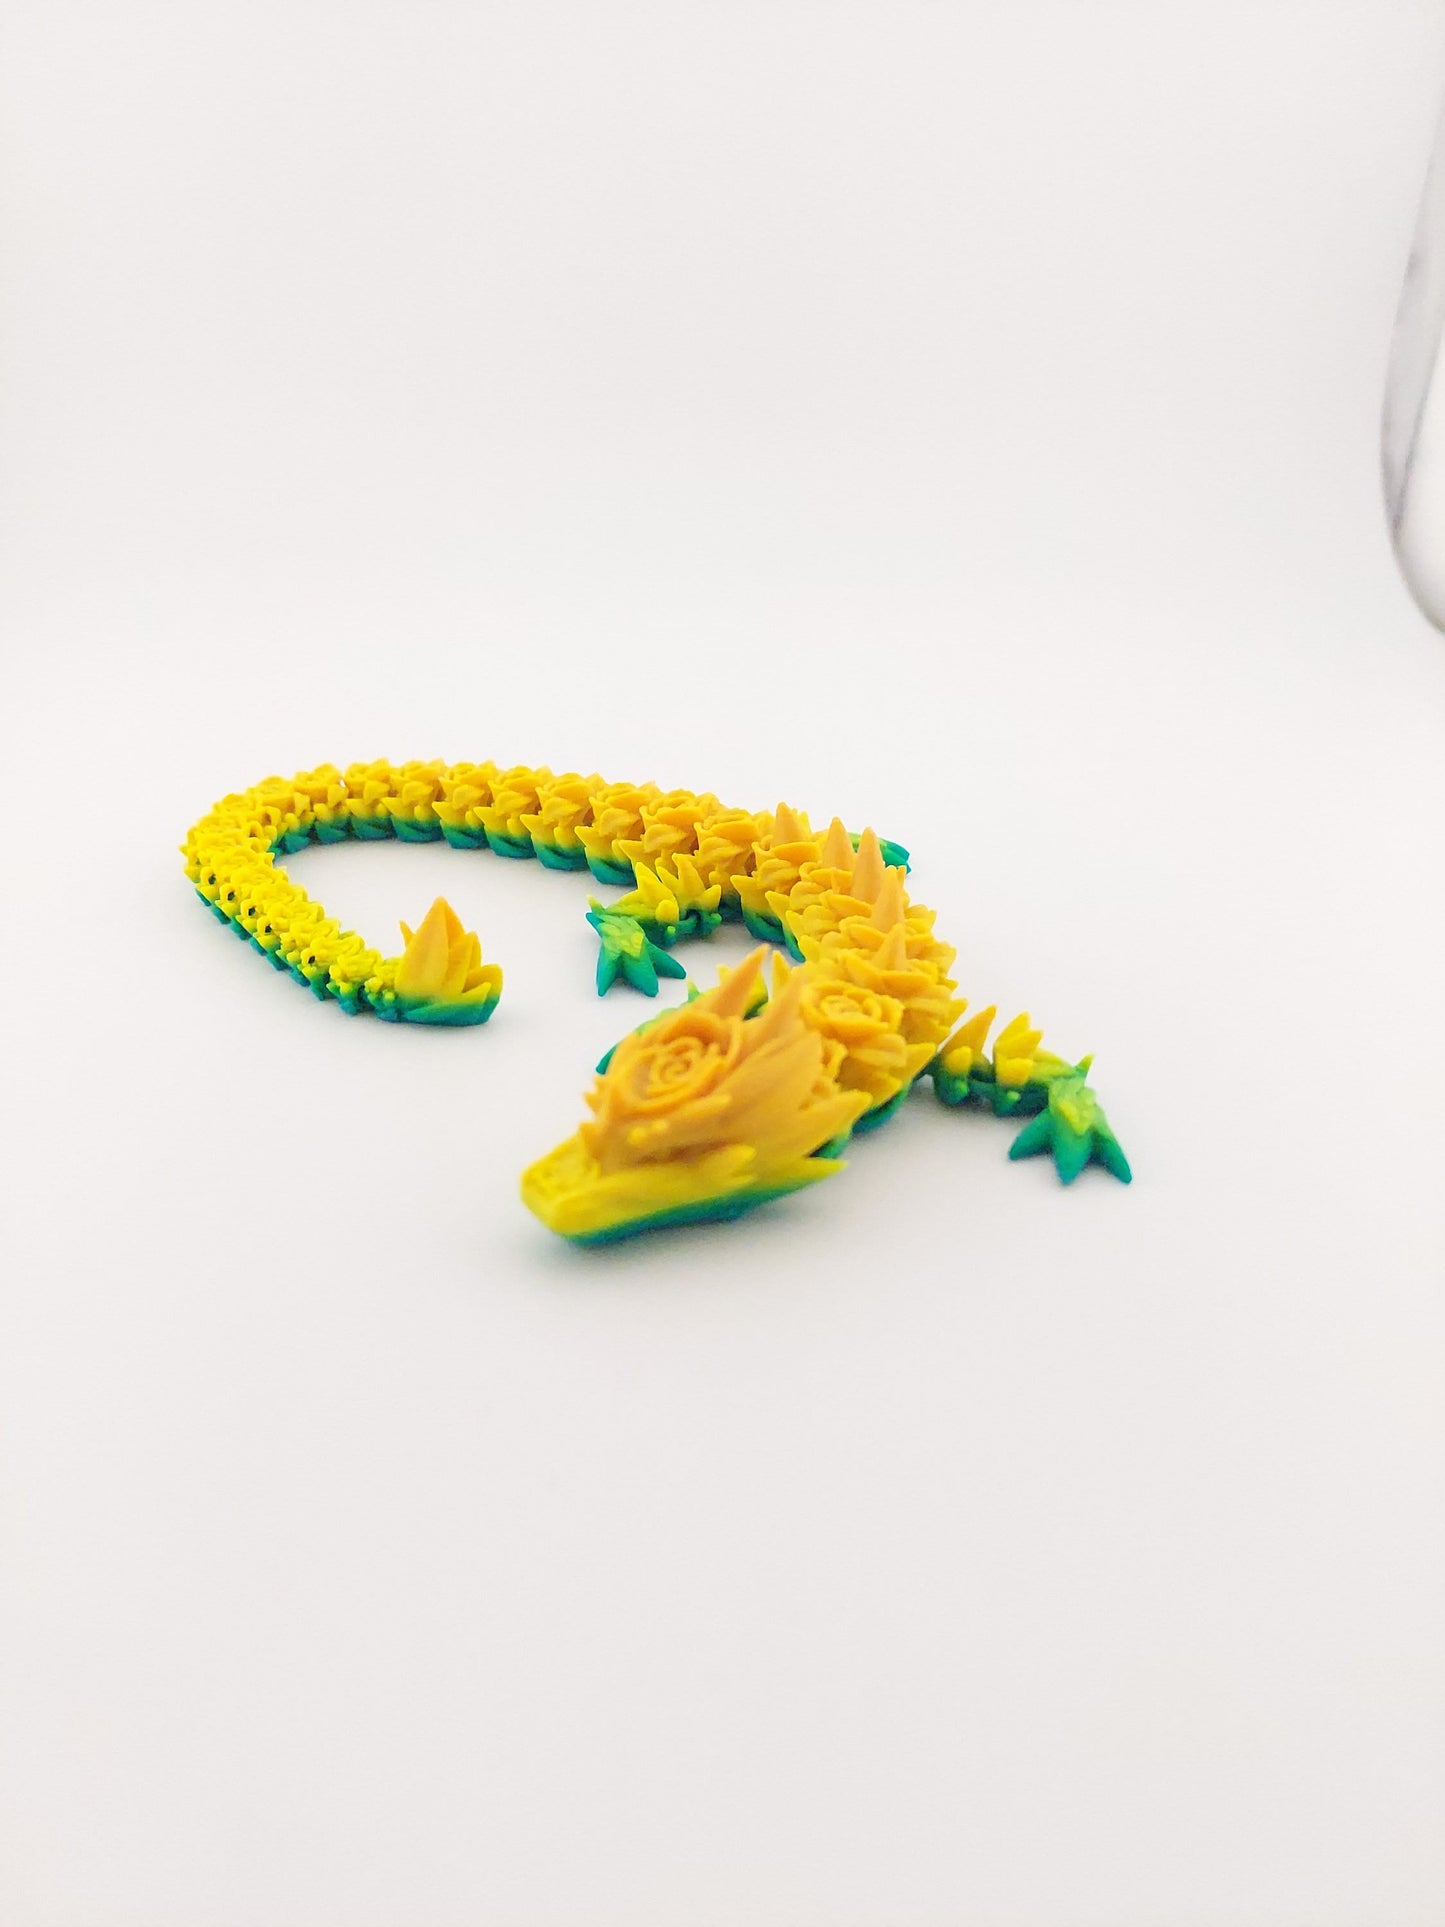 Articulated Rose Dragon - Flexible Sensory Toy - Unique Gift